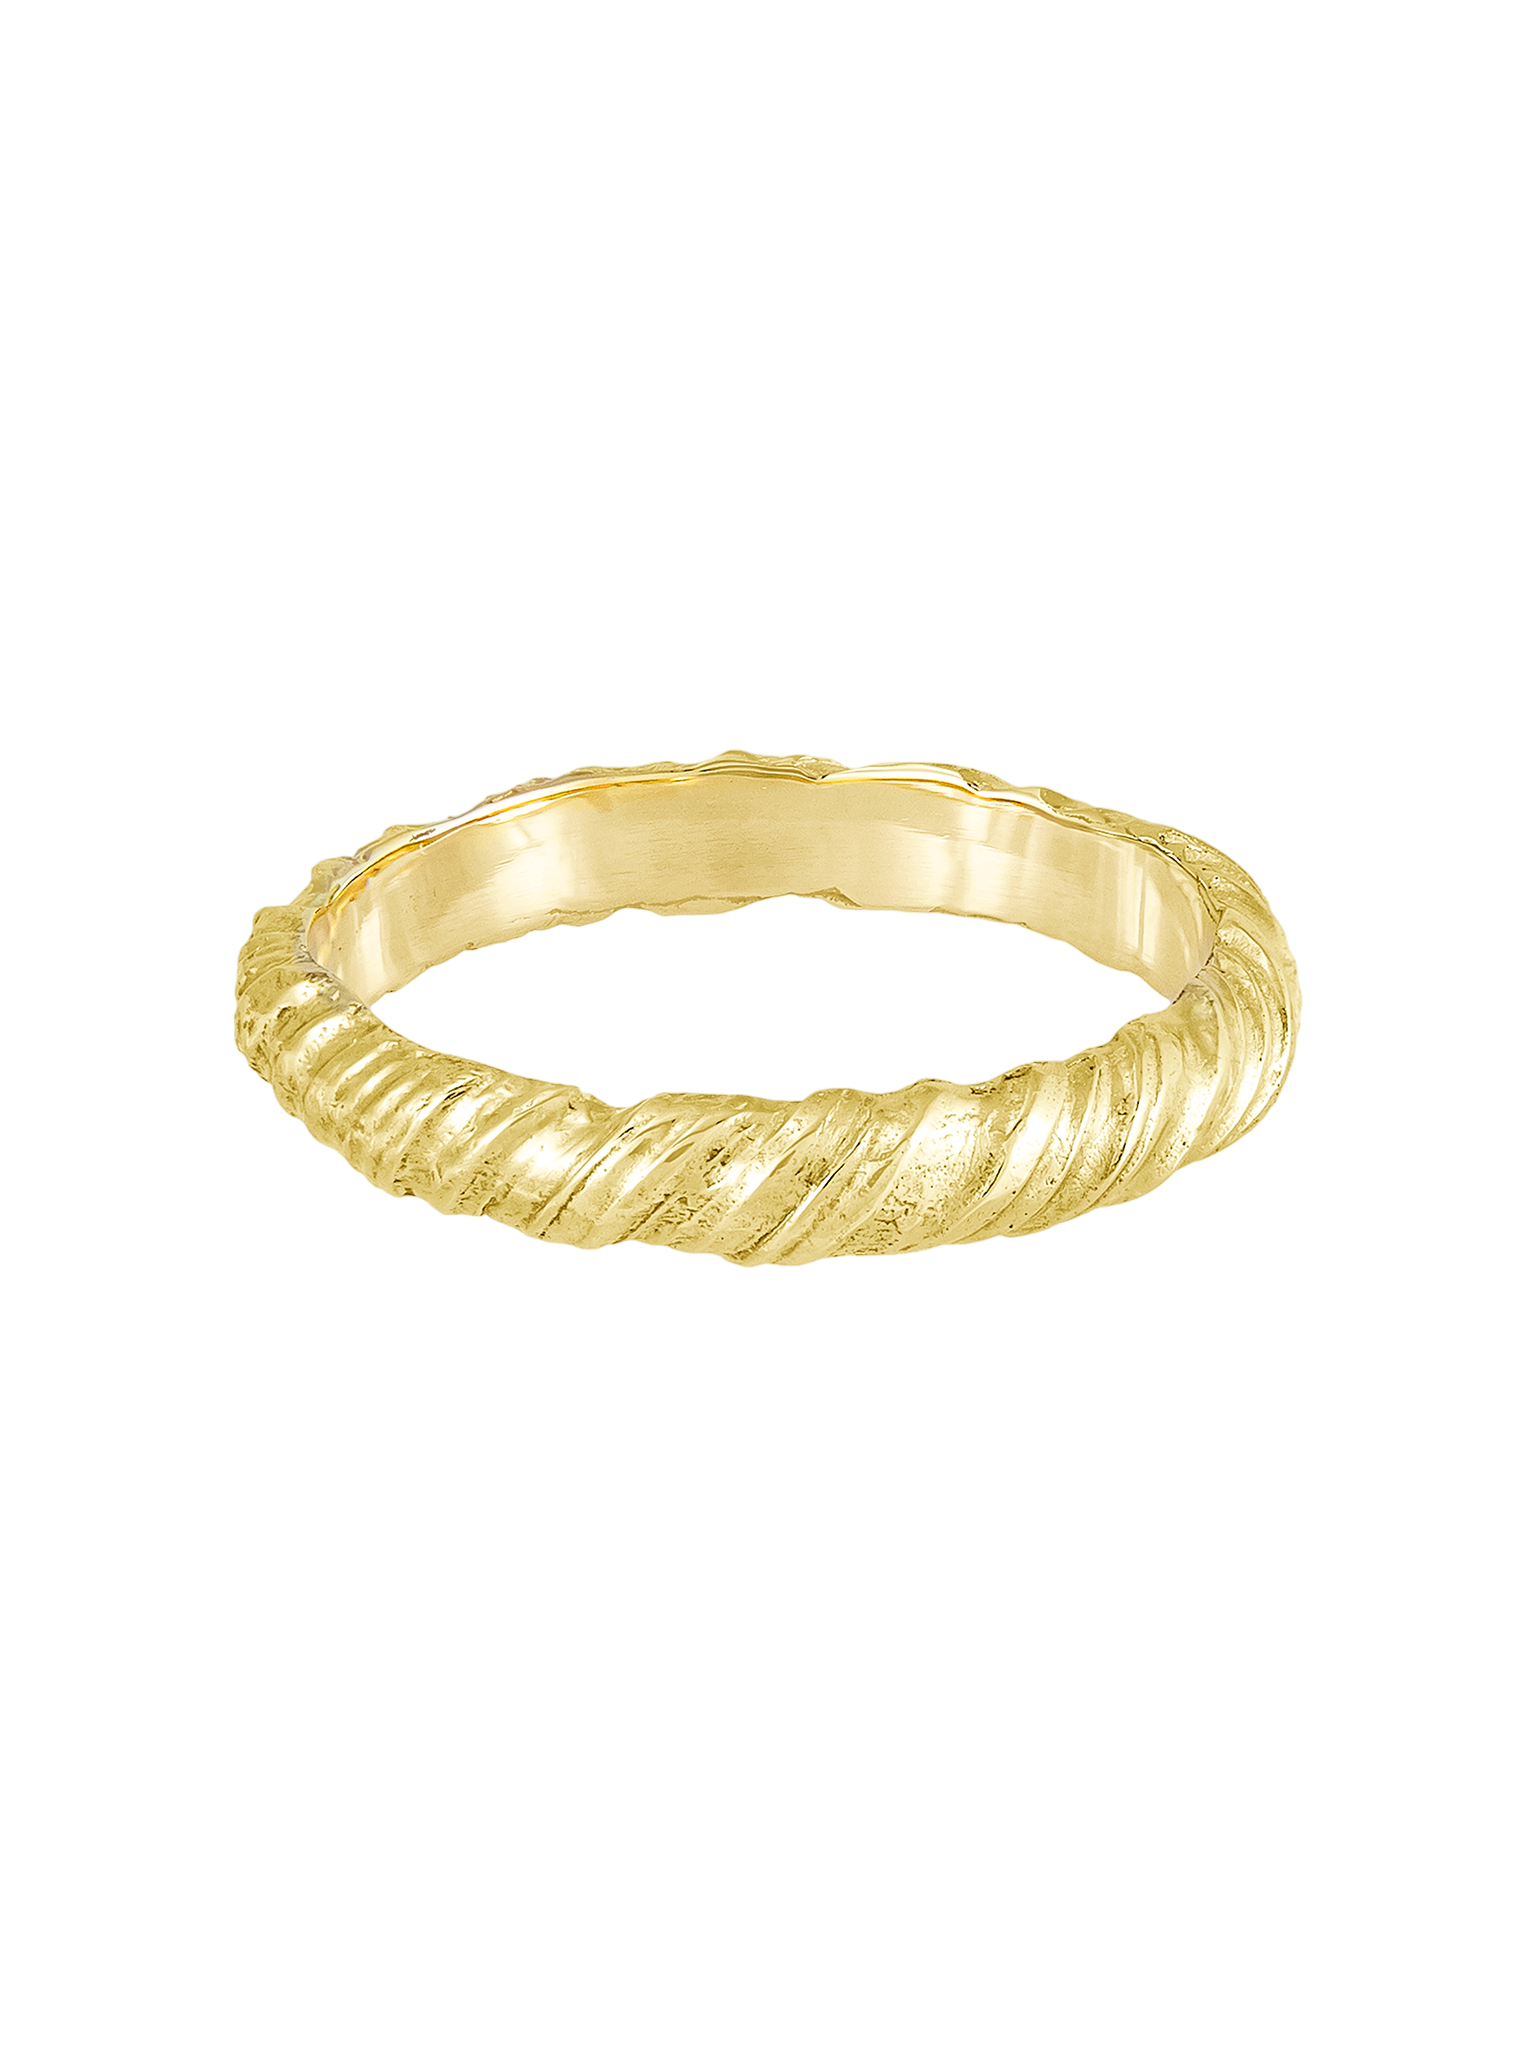 Entwined 4mm organic twisted wedding ring